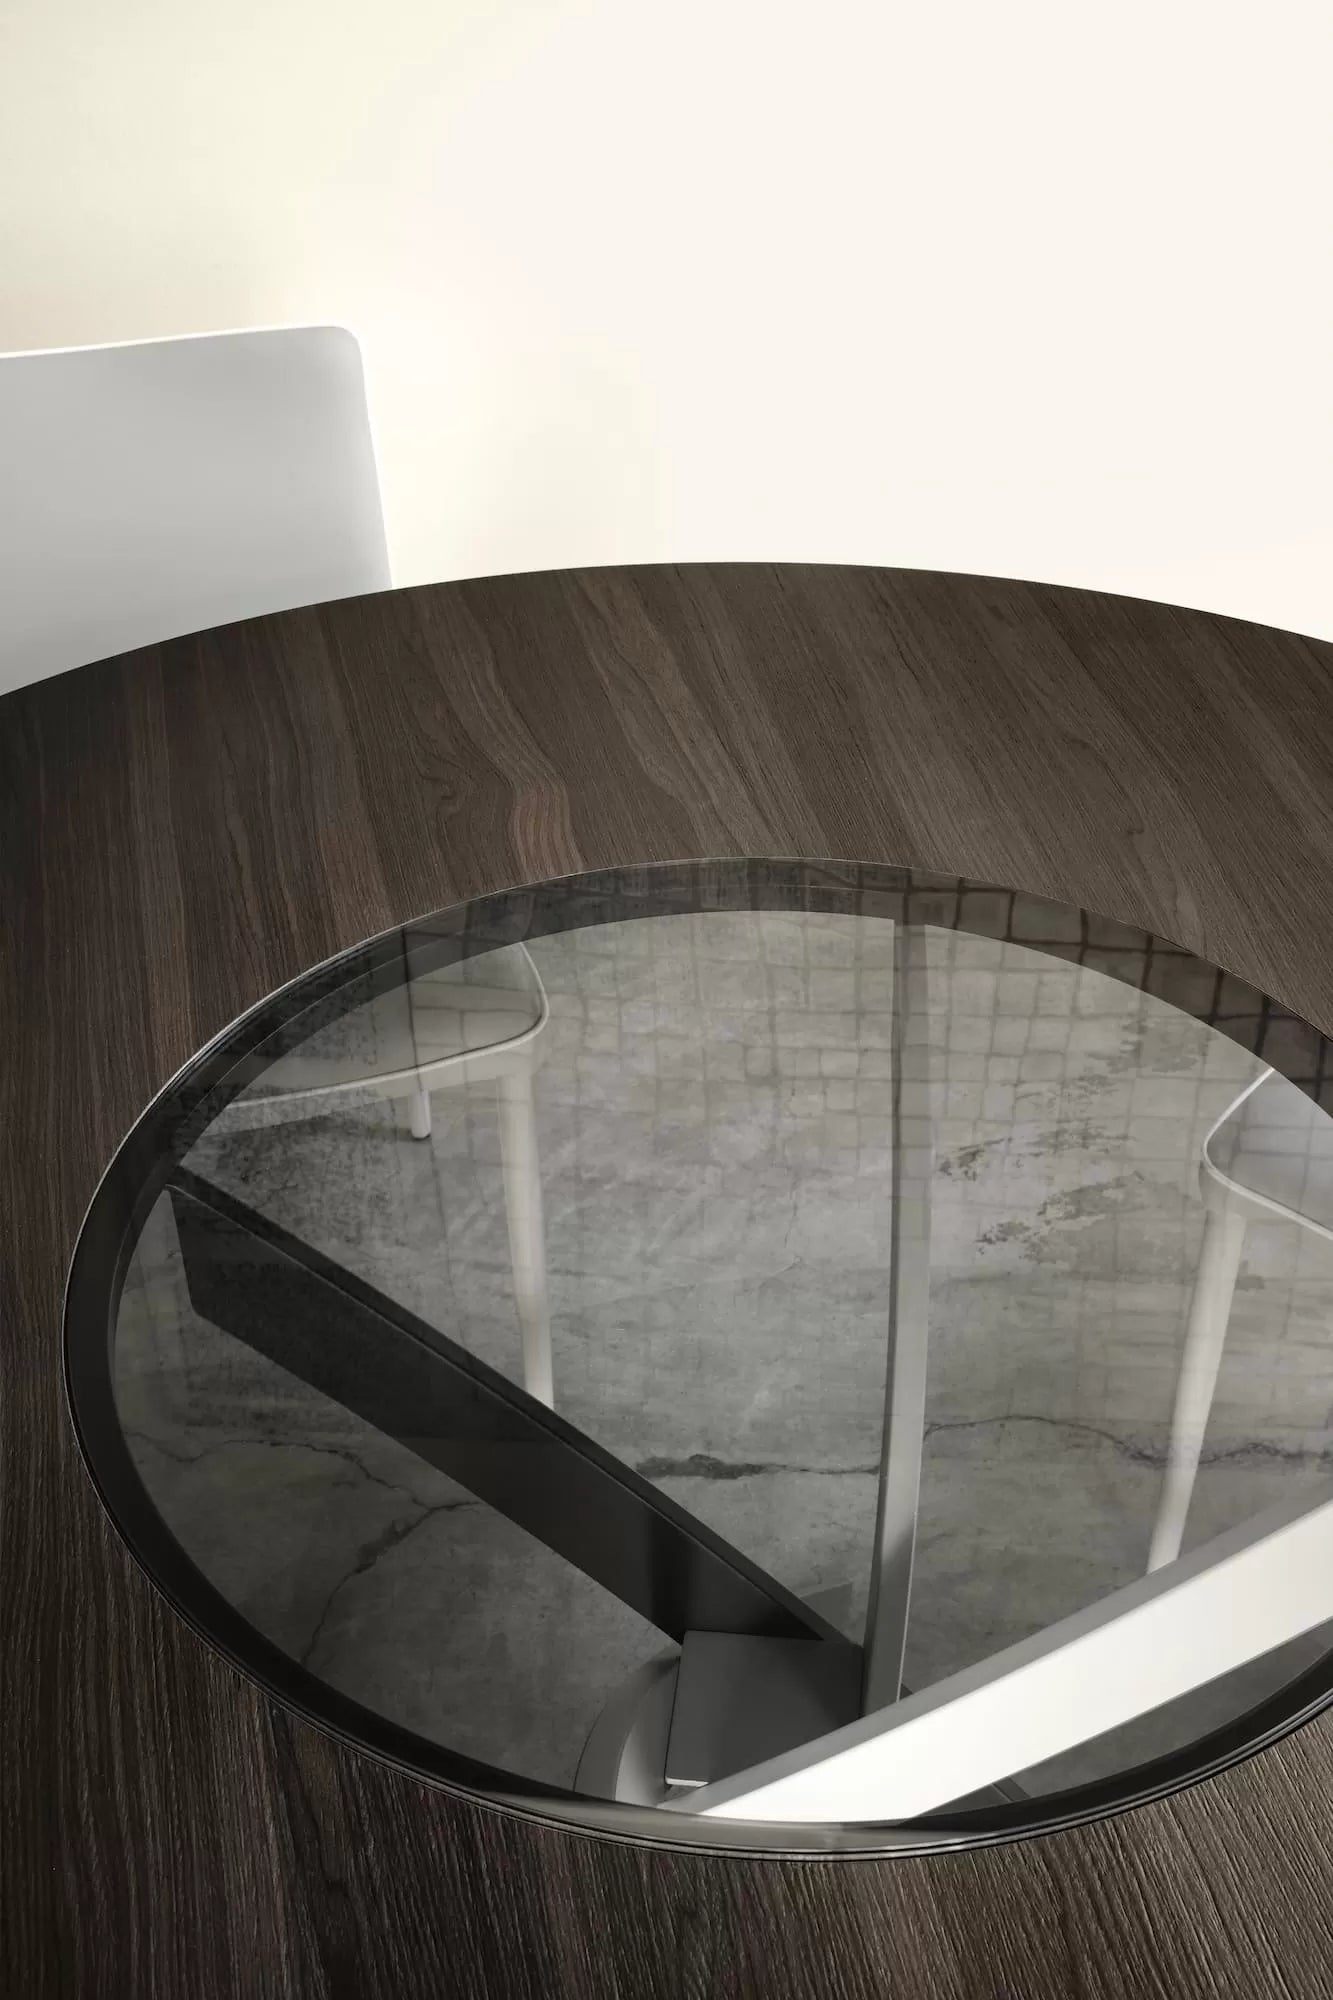 Barone Fixed Round Table With Central Turntable In Glass